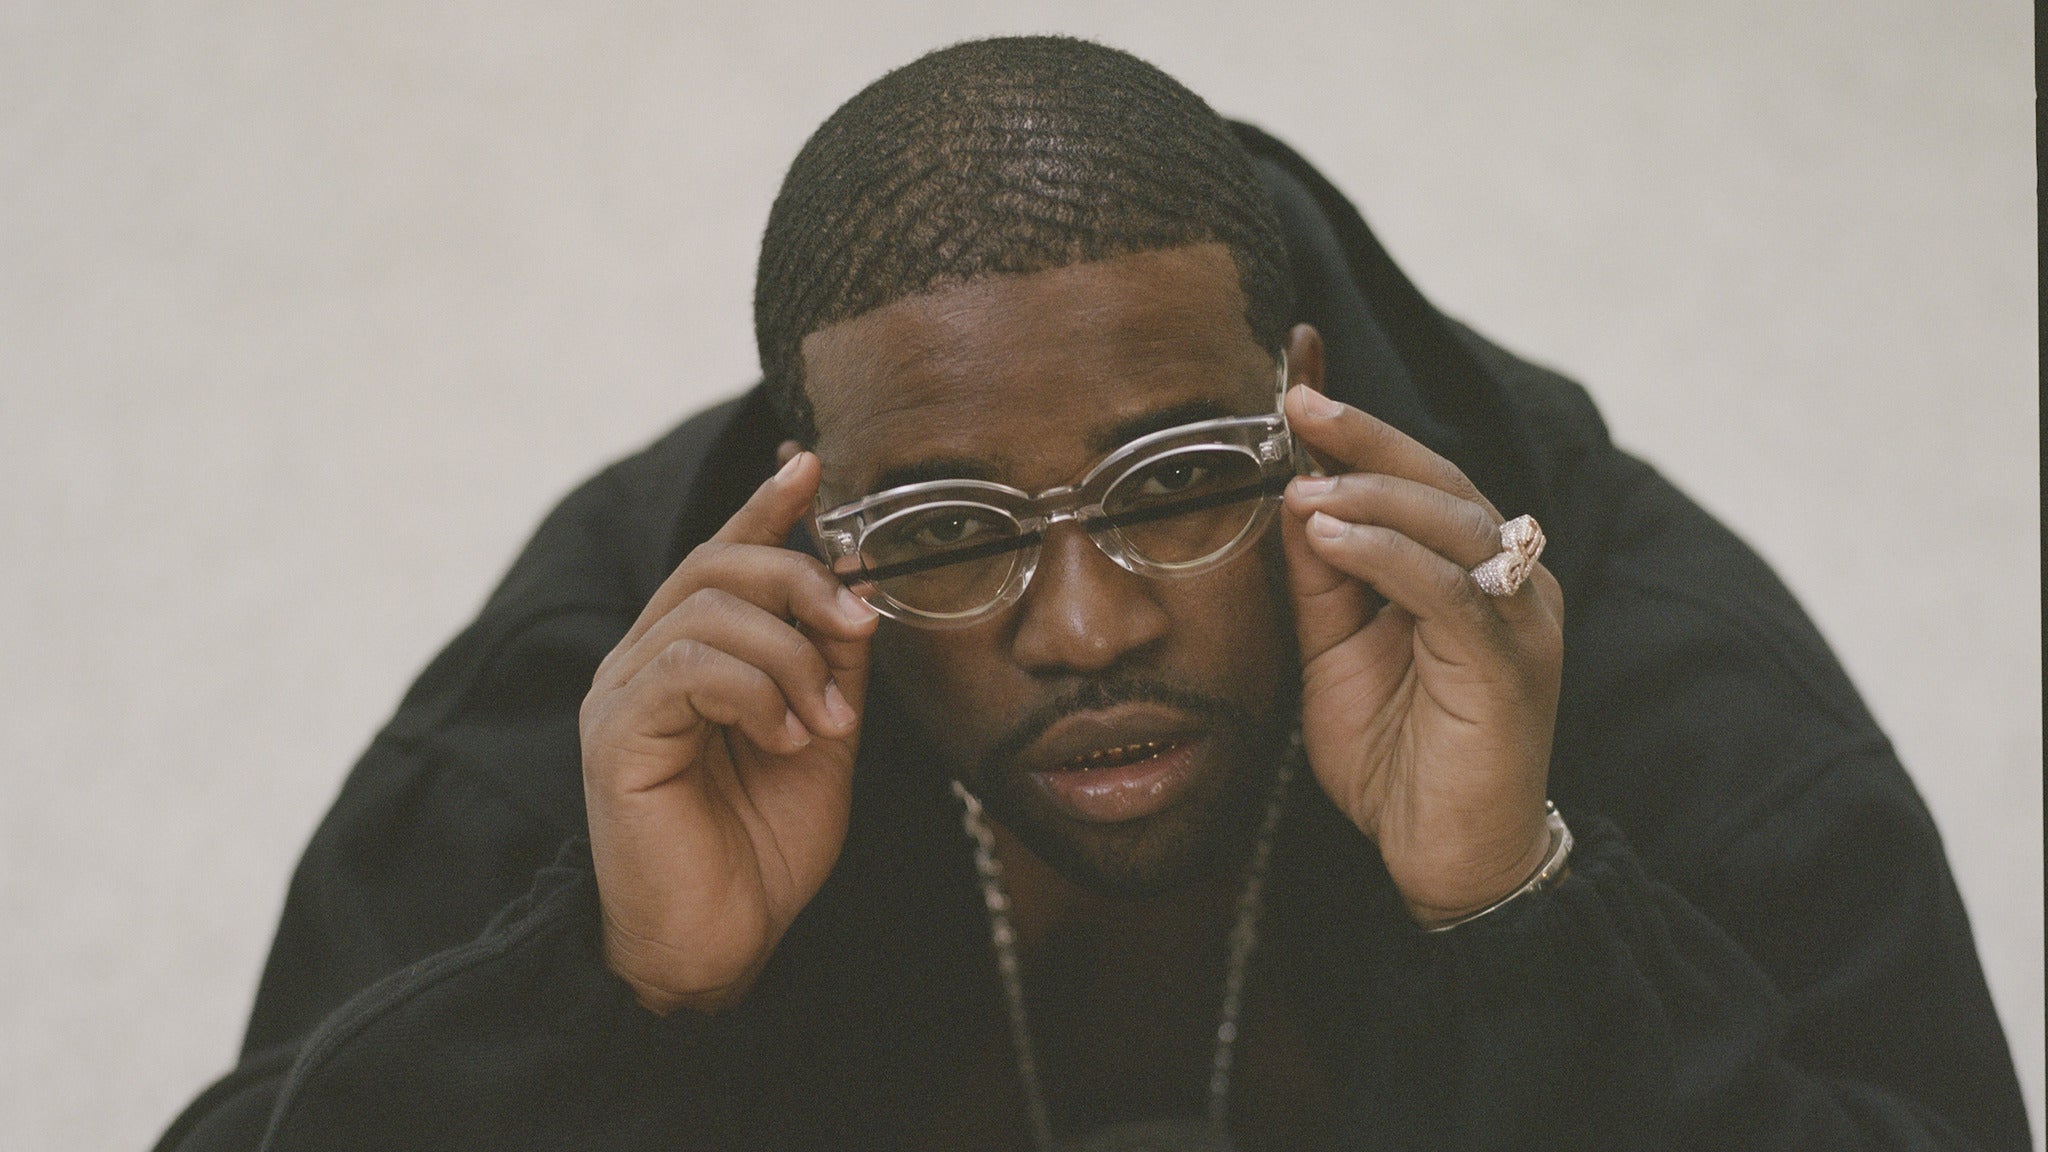 FERG presents Mad Man Tour in Chicago promo photo for Live Nation presale offer code